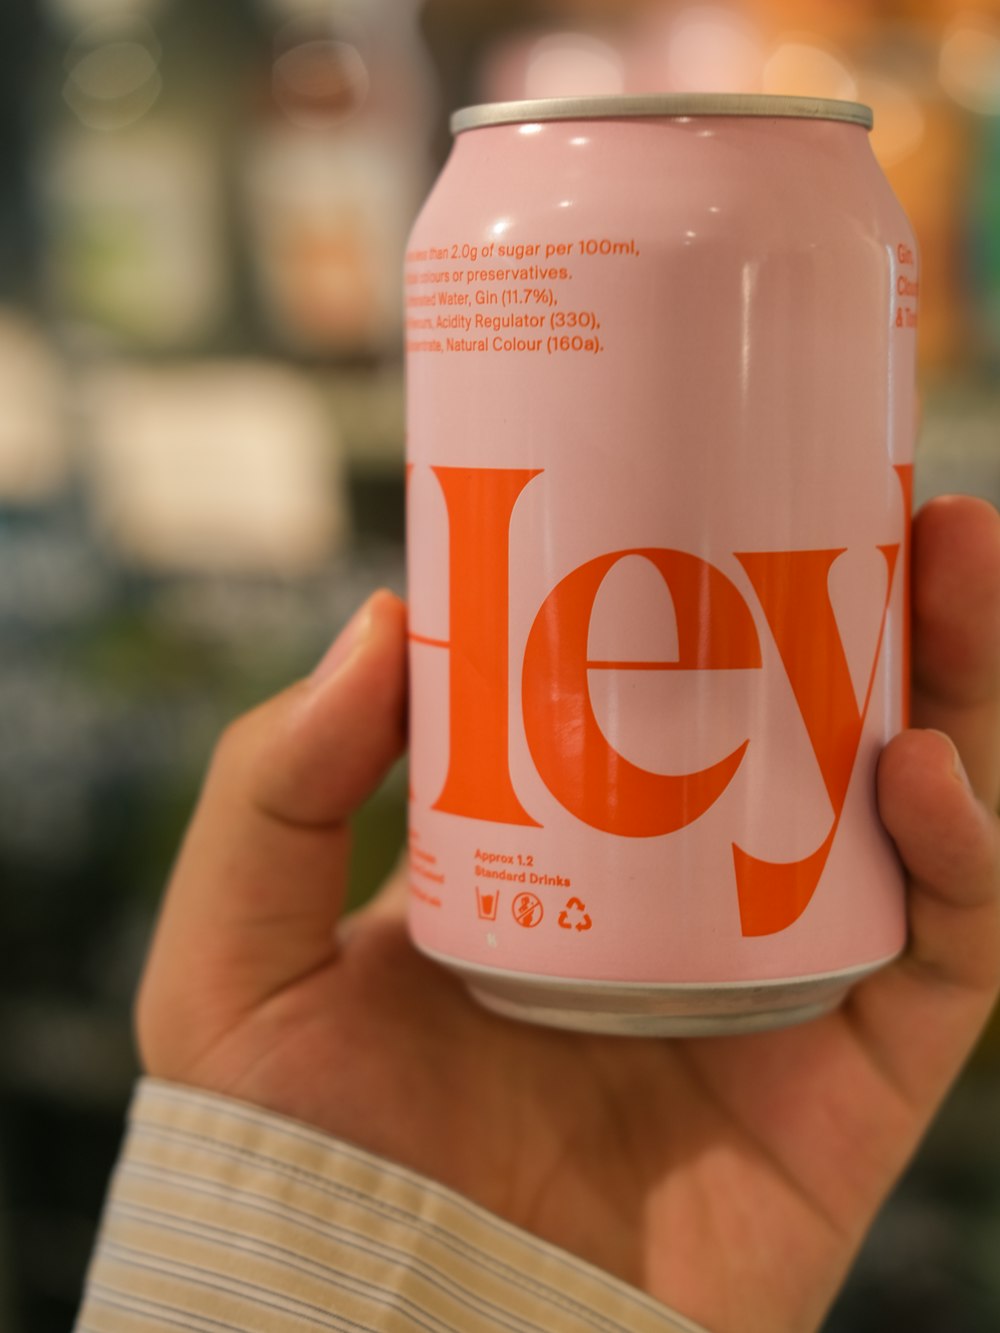 a hand holding a pink and orange can of jely